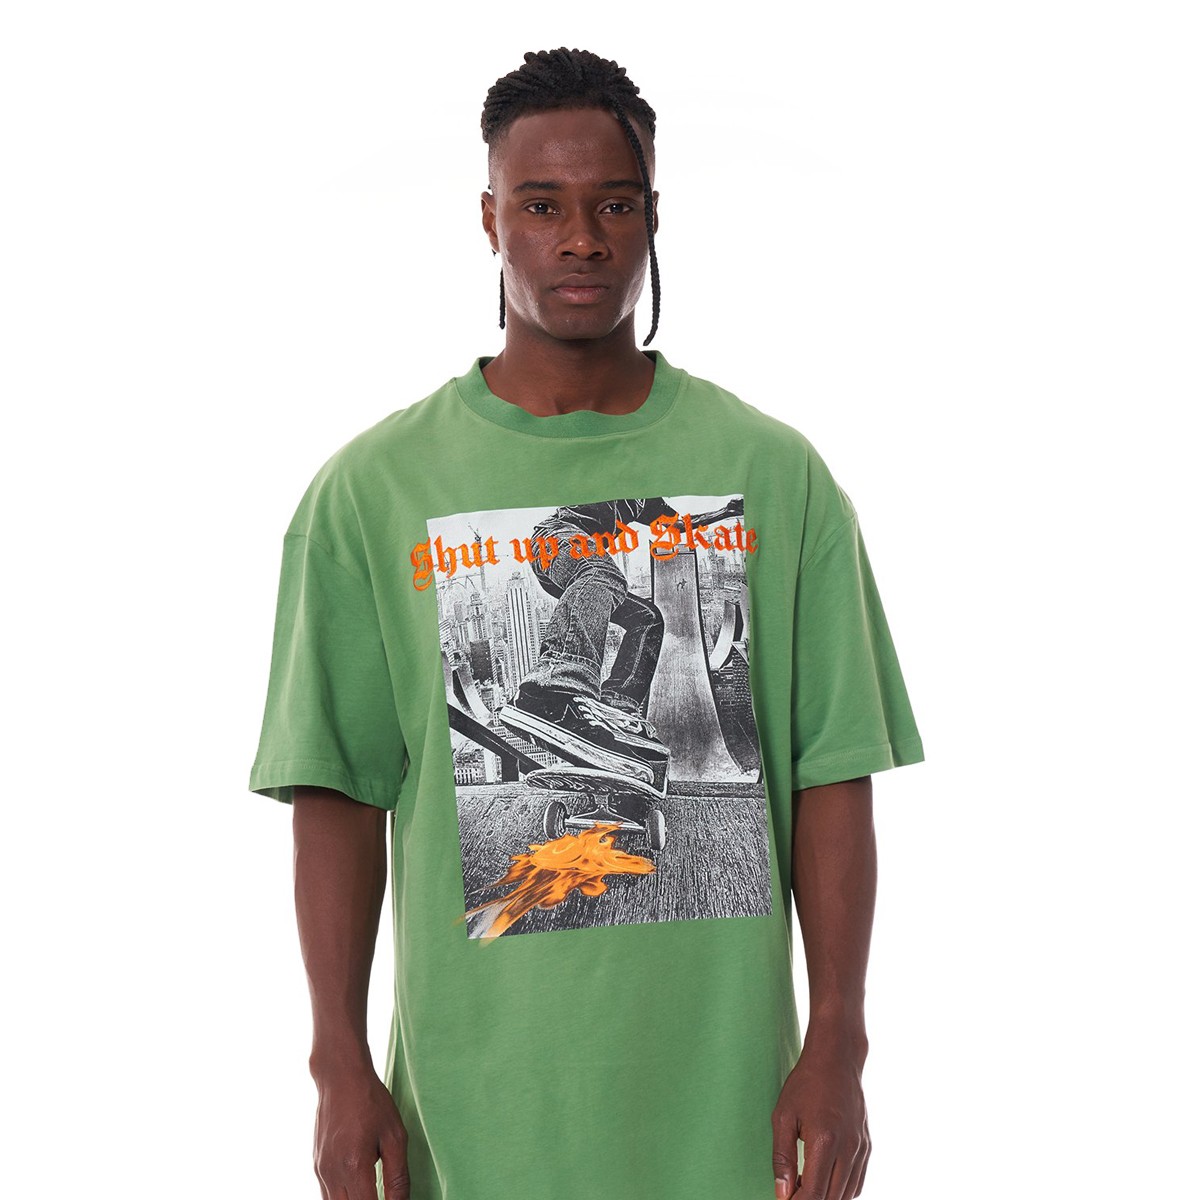 Ghetto Off Limits Shut Up And Skate Green Oversize T-Shirt TS-20003